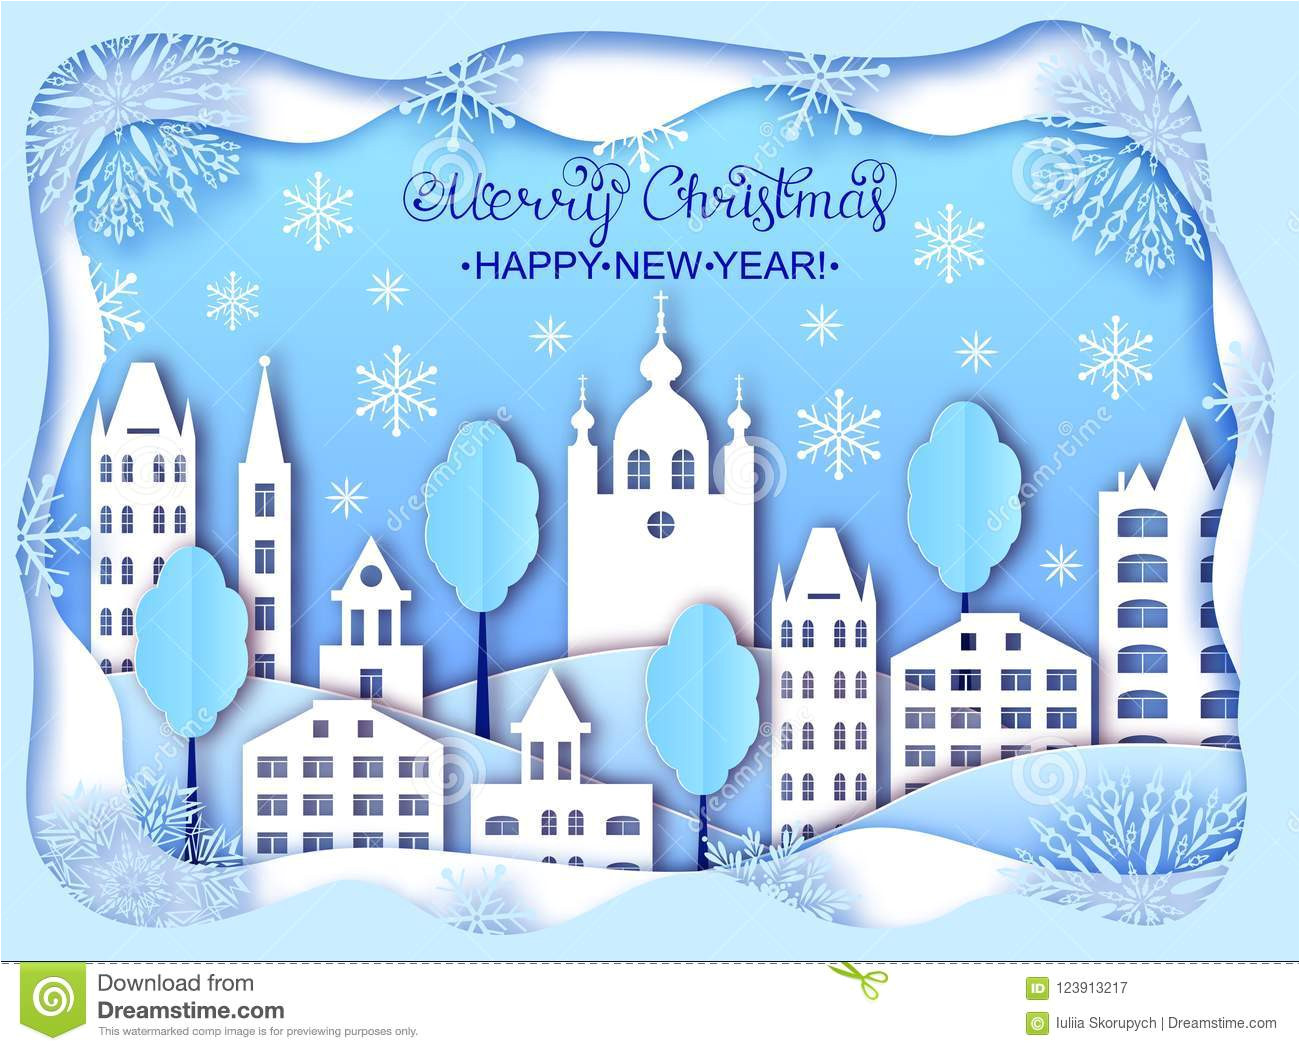 building big city clouds winter paper art style christmas happy new year card 123913217 jpg